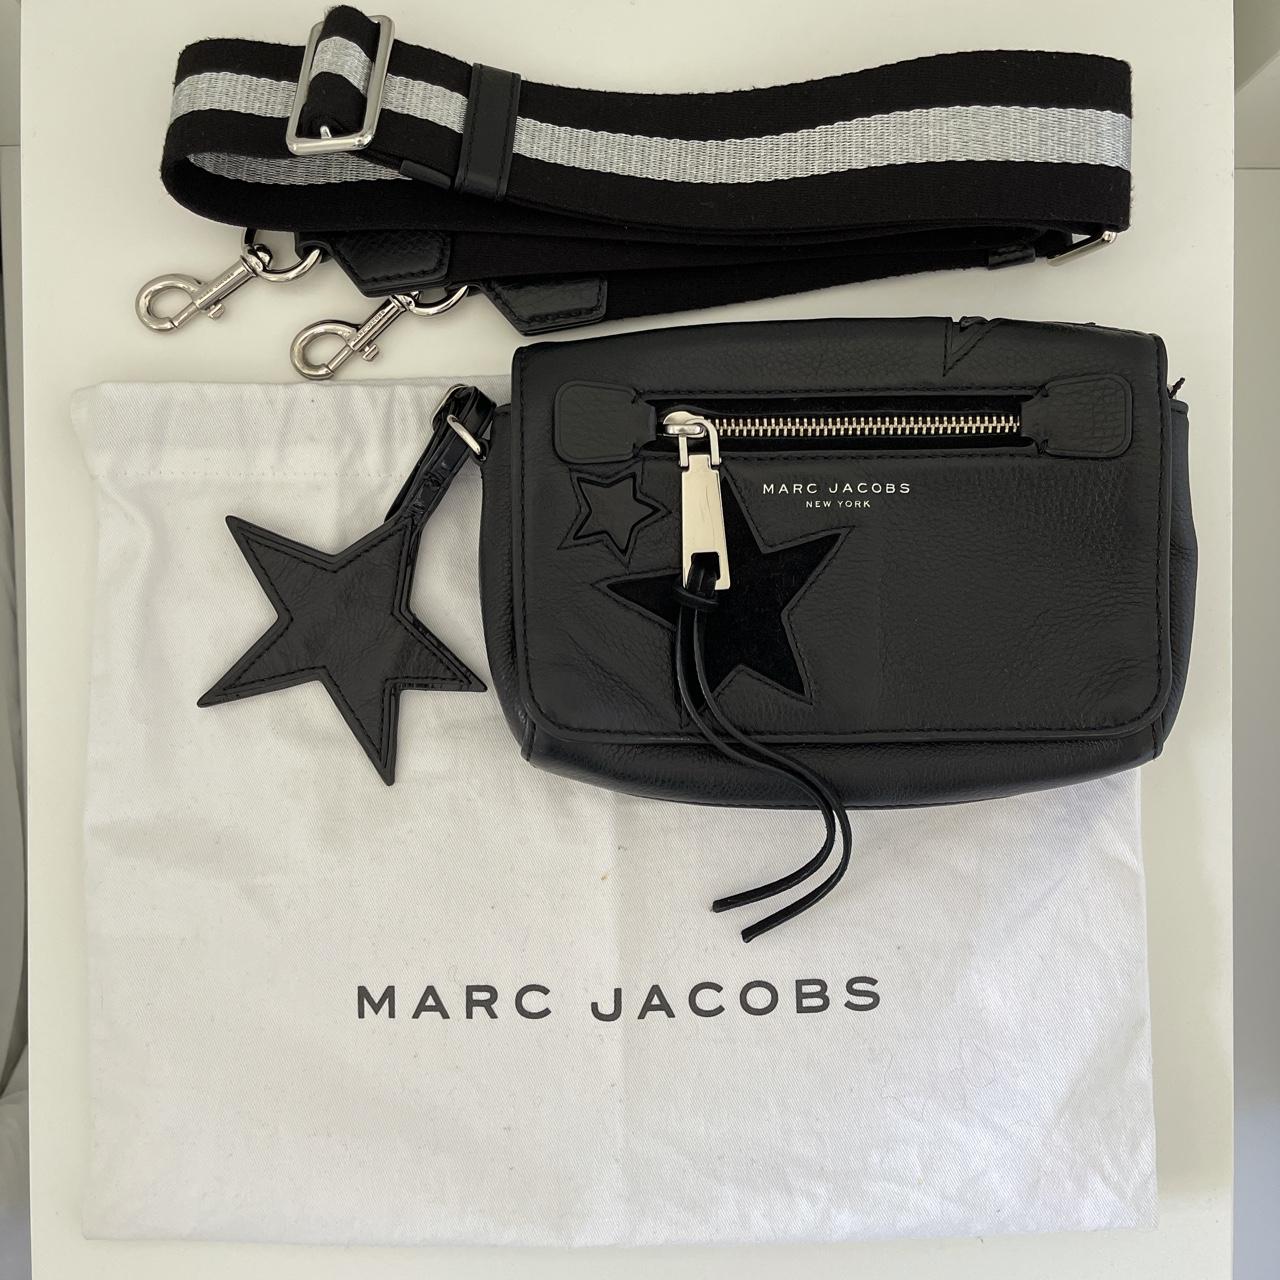 Authentic Marc Jacobs Black Star Embroidered Leather... - Depop